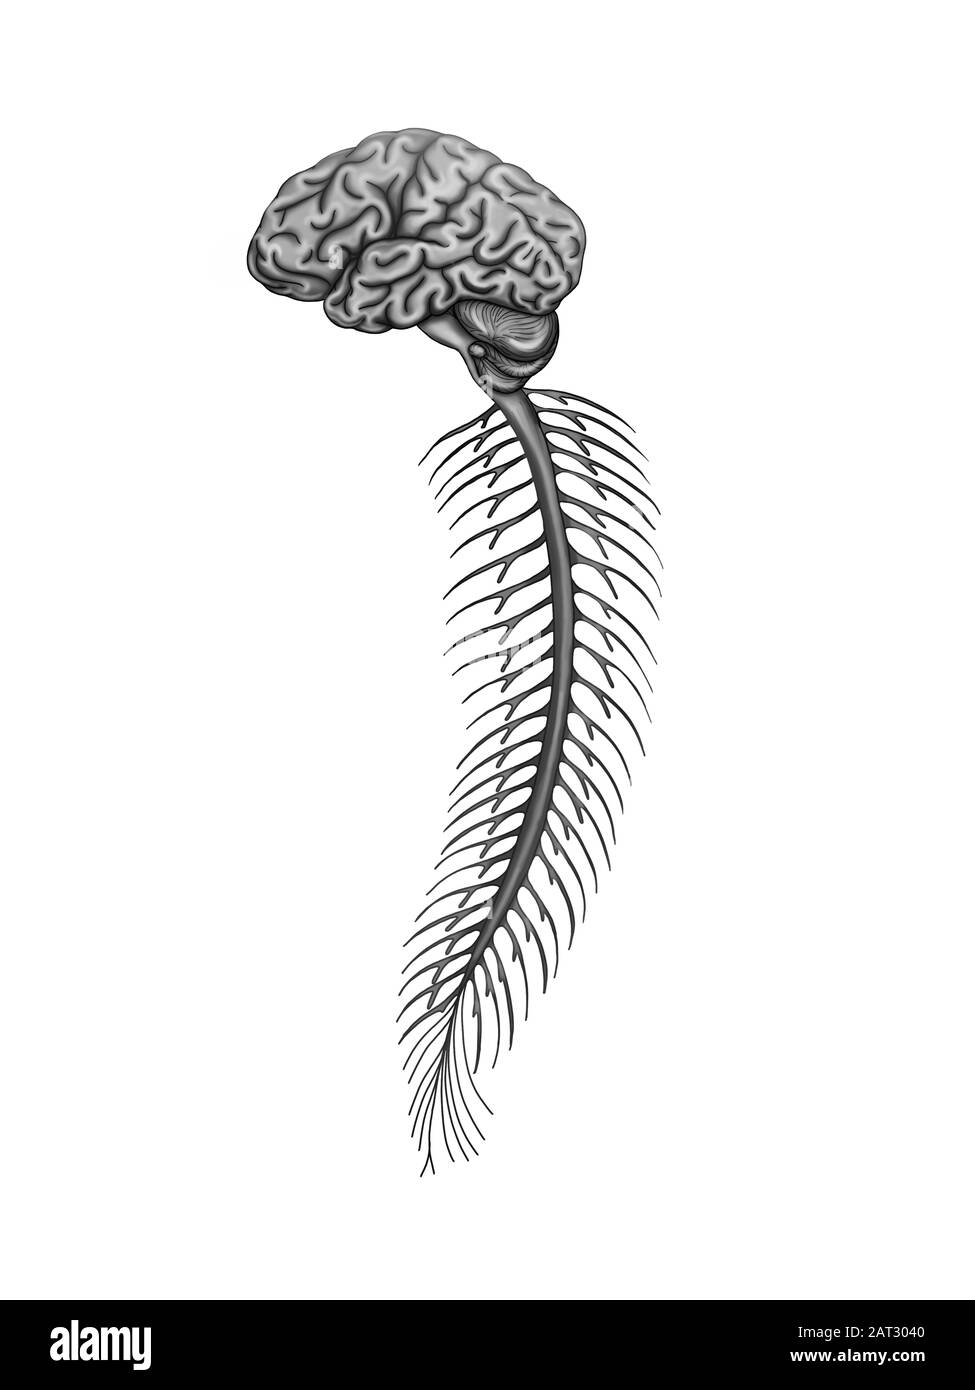 Illustration of the human spinal cord Stock Photo